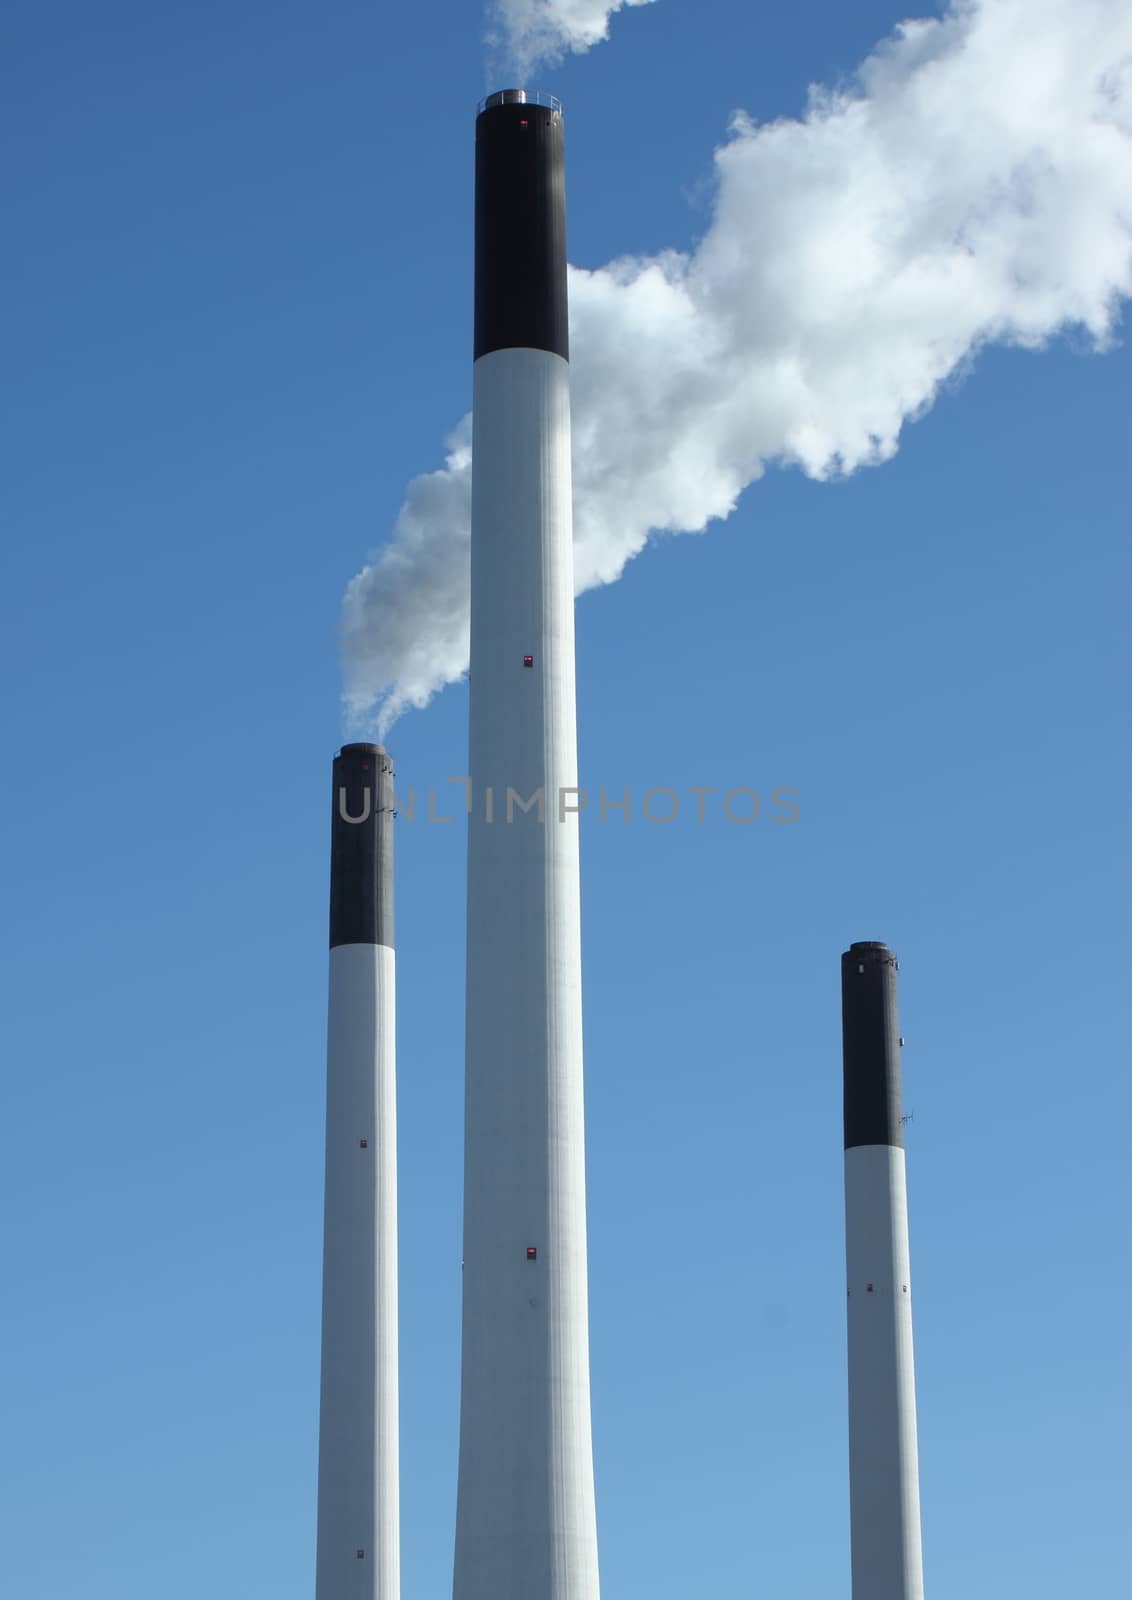 Factory chimneys at energy plant with blue sky and lake by HoleInTheBox